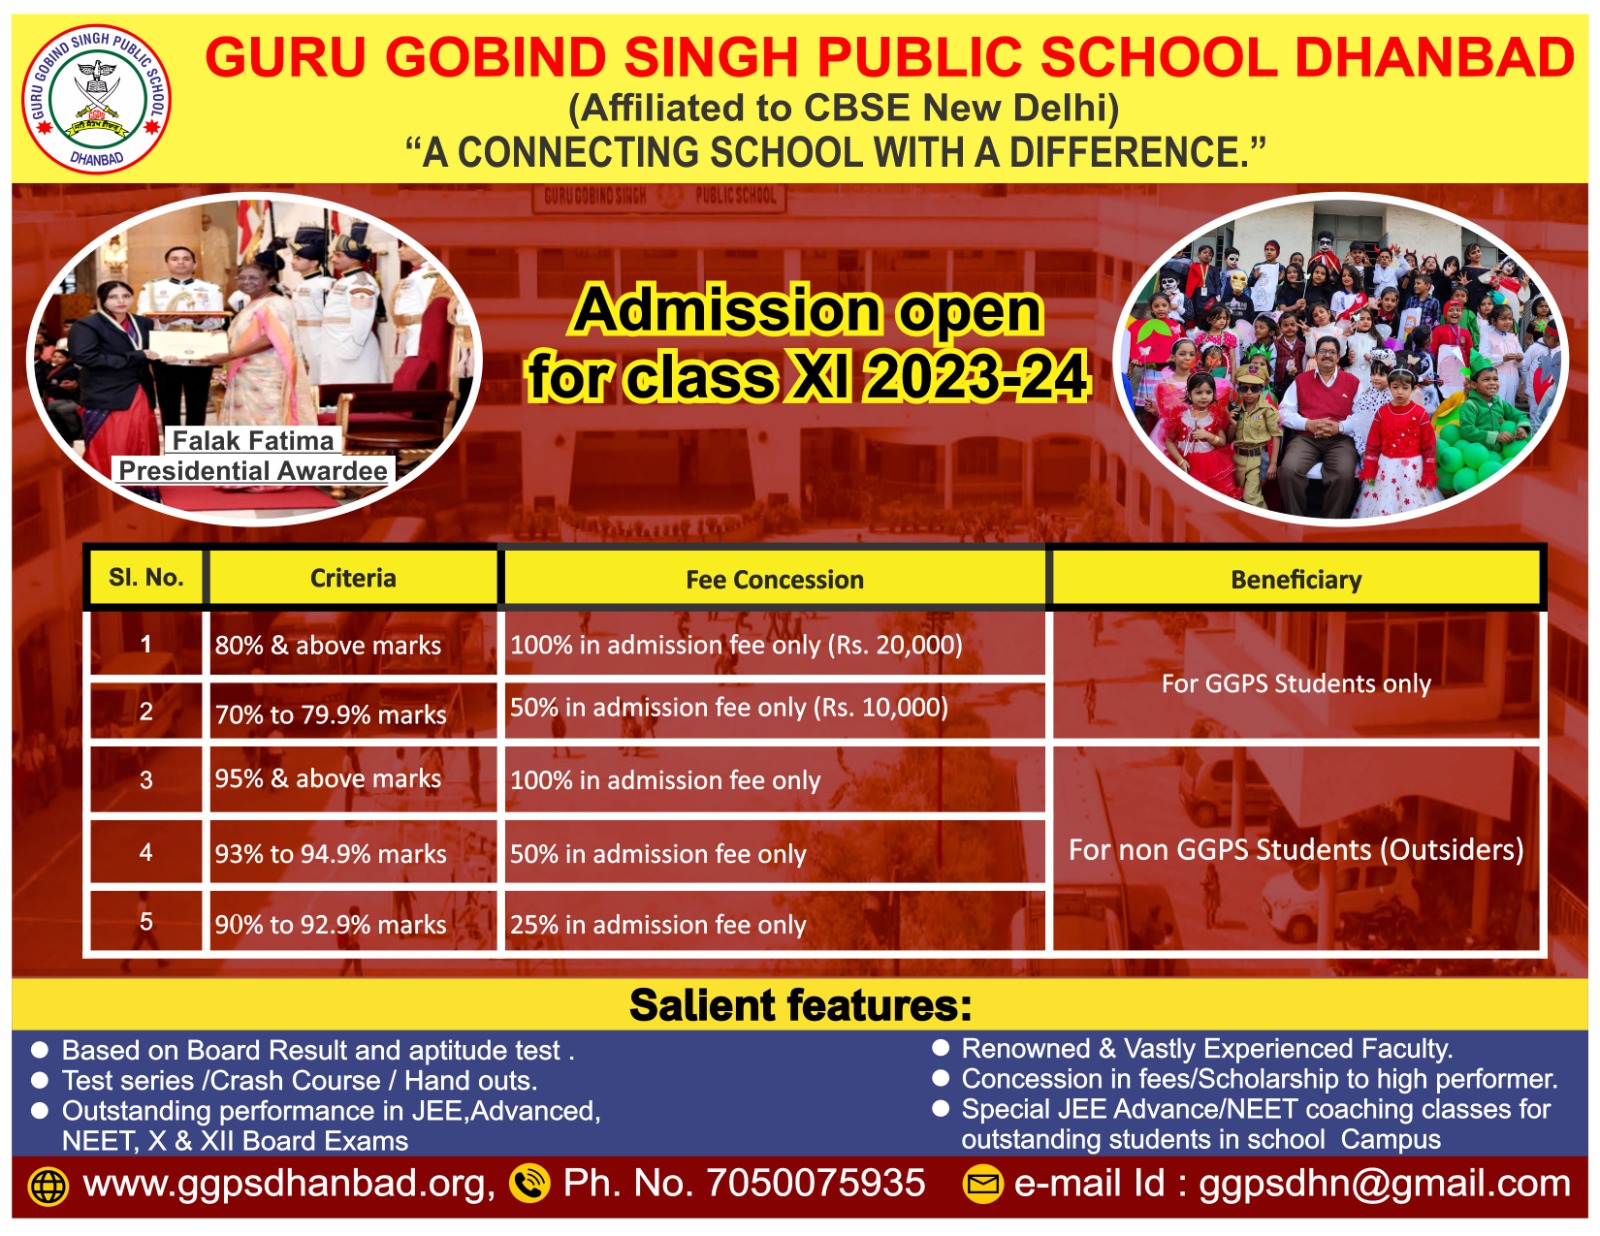 Admission offer for Talented Students